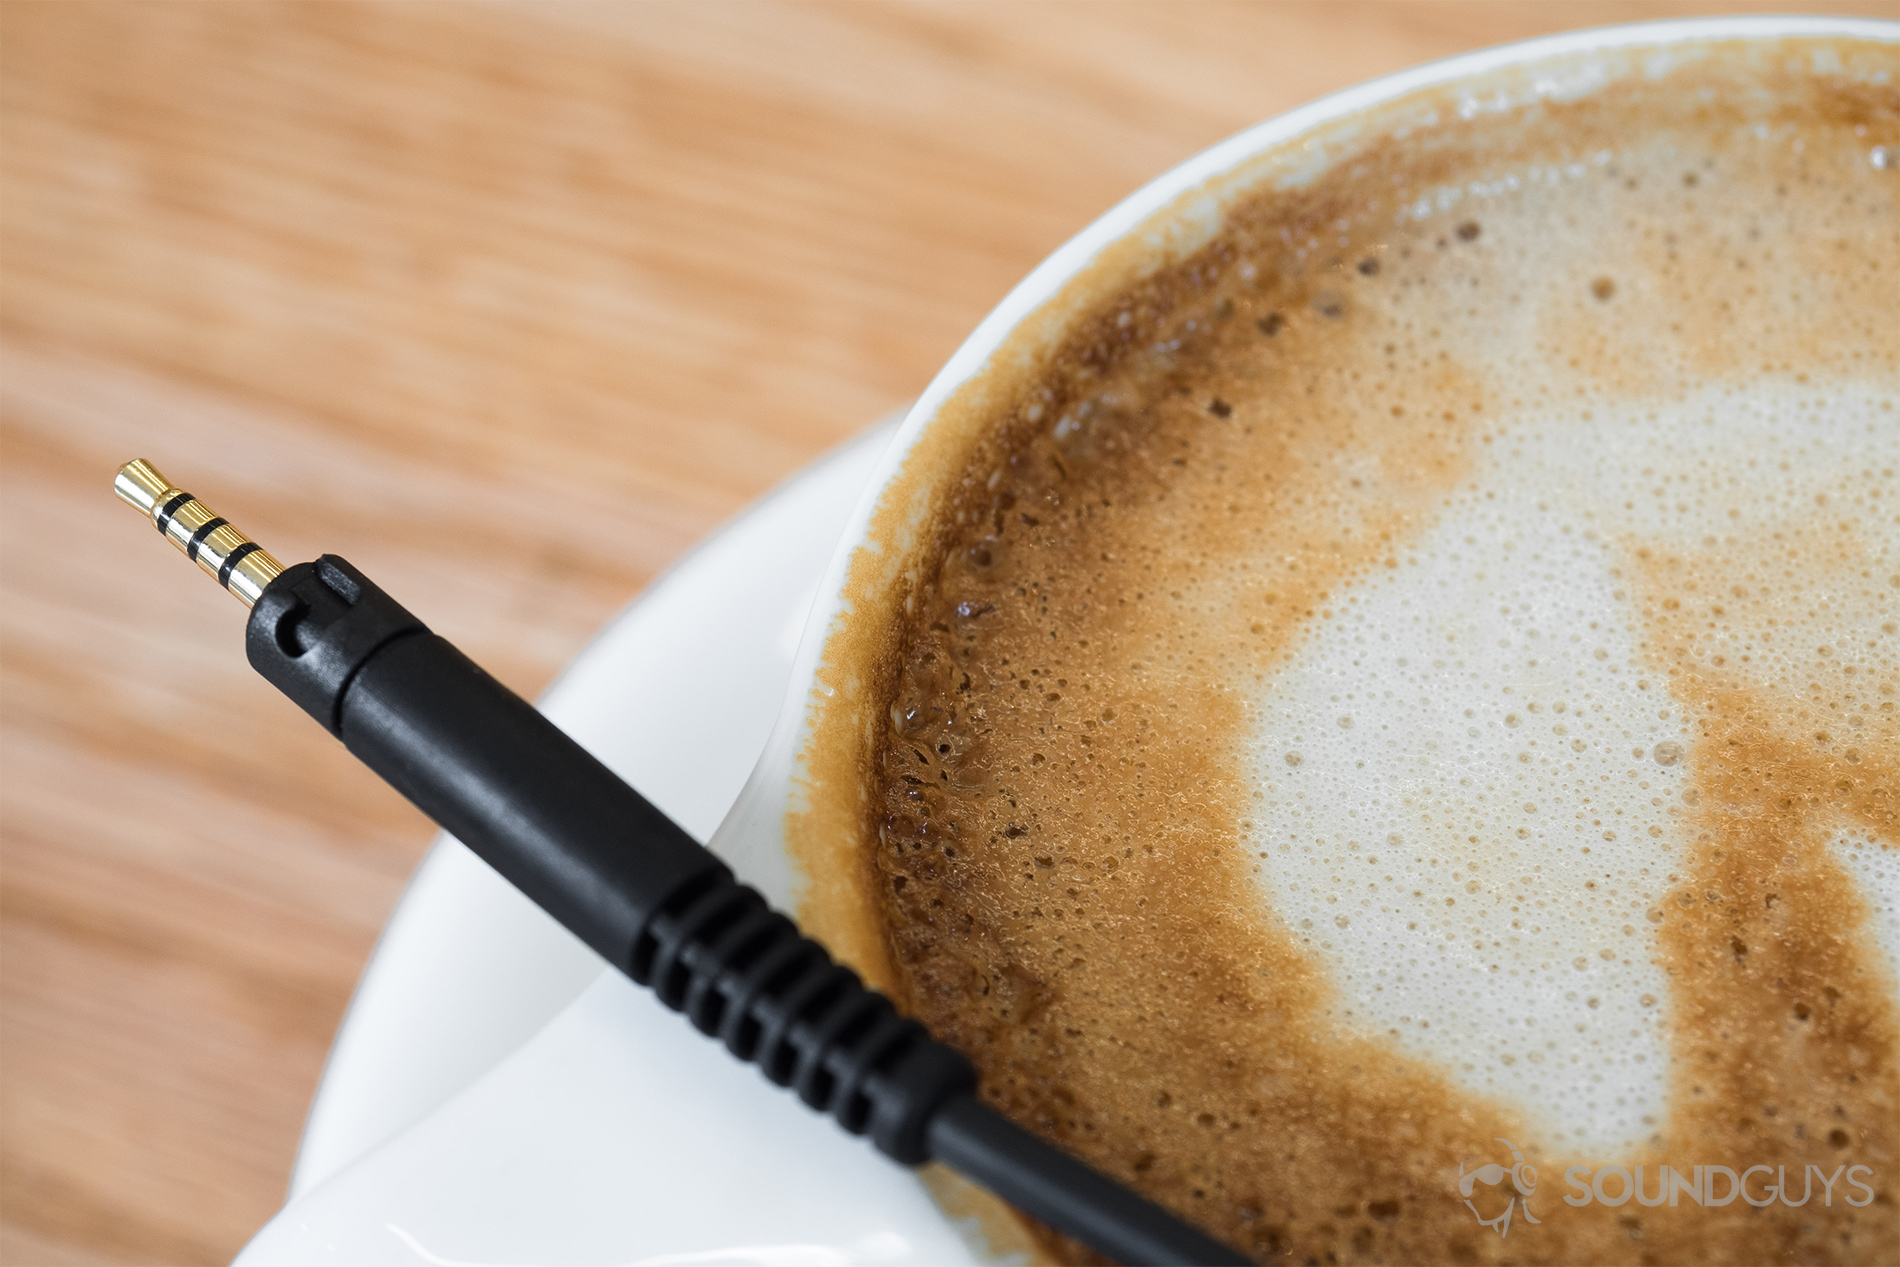 A close up of the Sennheiser HD 598 CS 2.5mm end of the cable on a cappuccino cup.